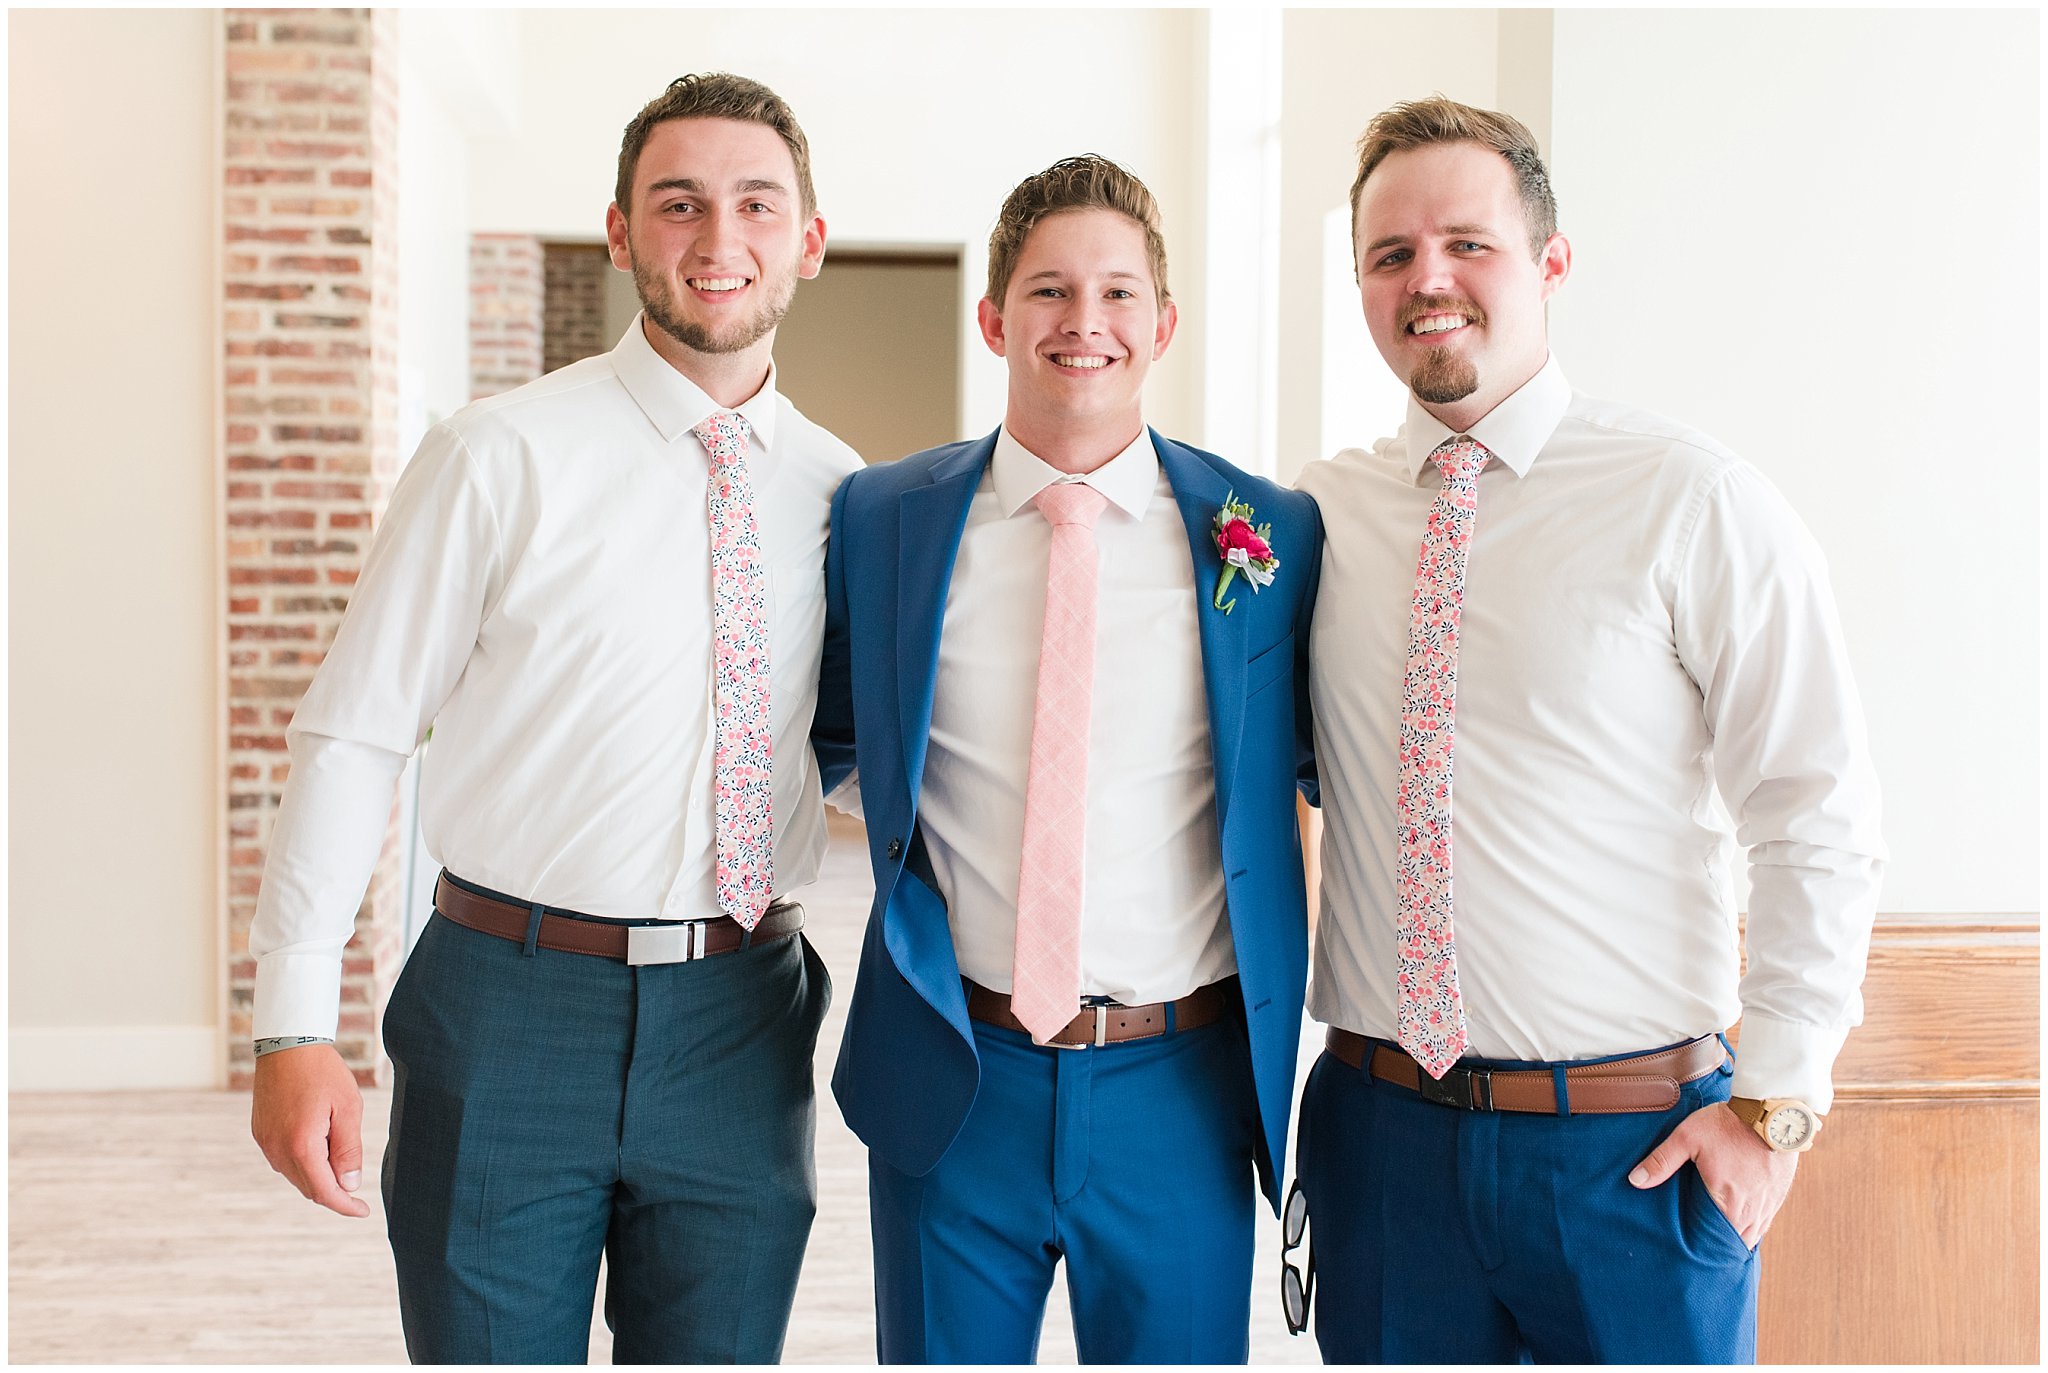 Bride and groom with guests | Talia Event Center Summer Wedding | Jessie and Dallin Photography